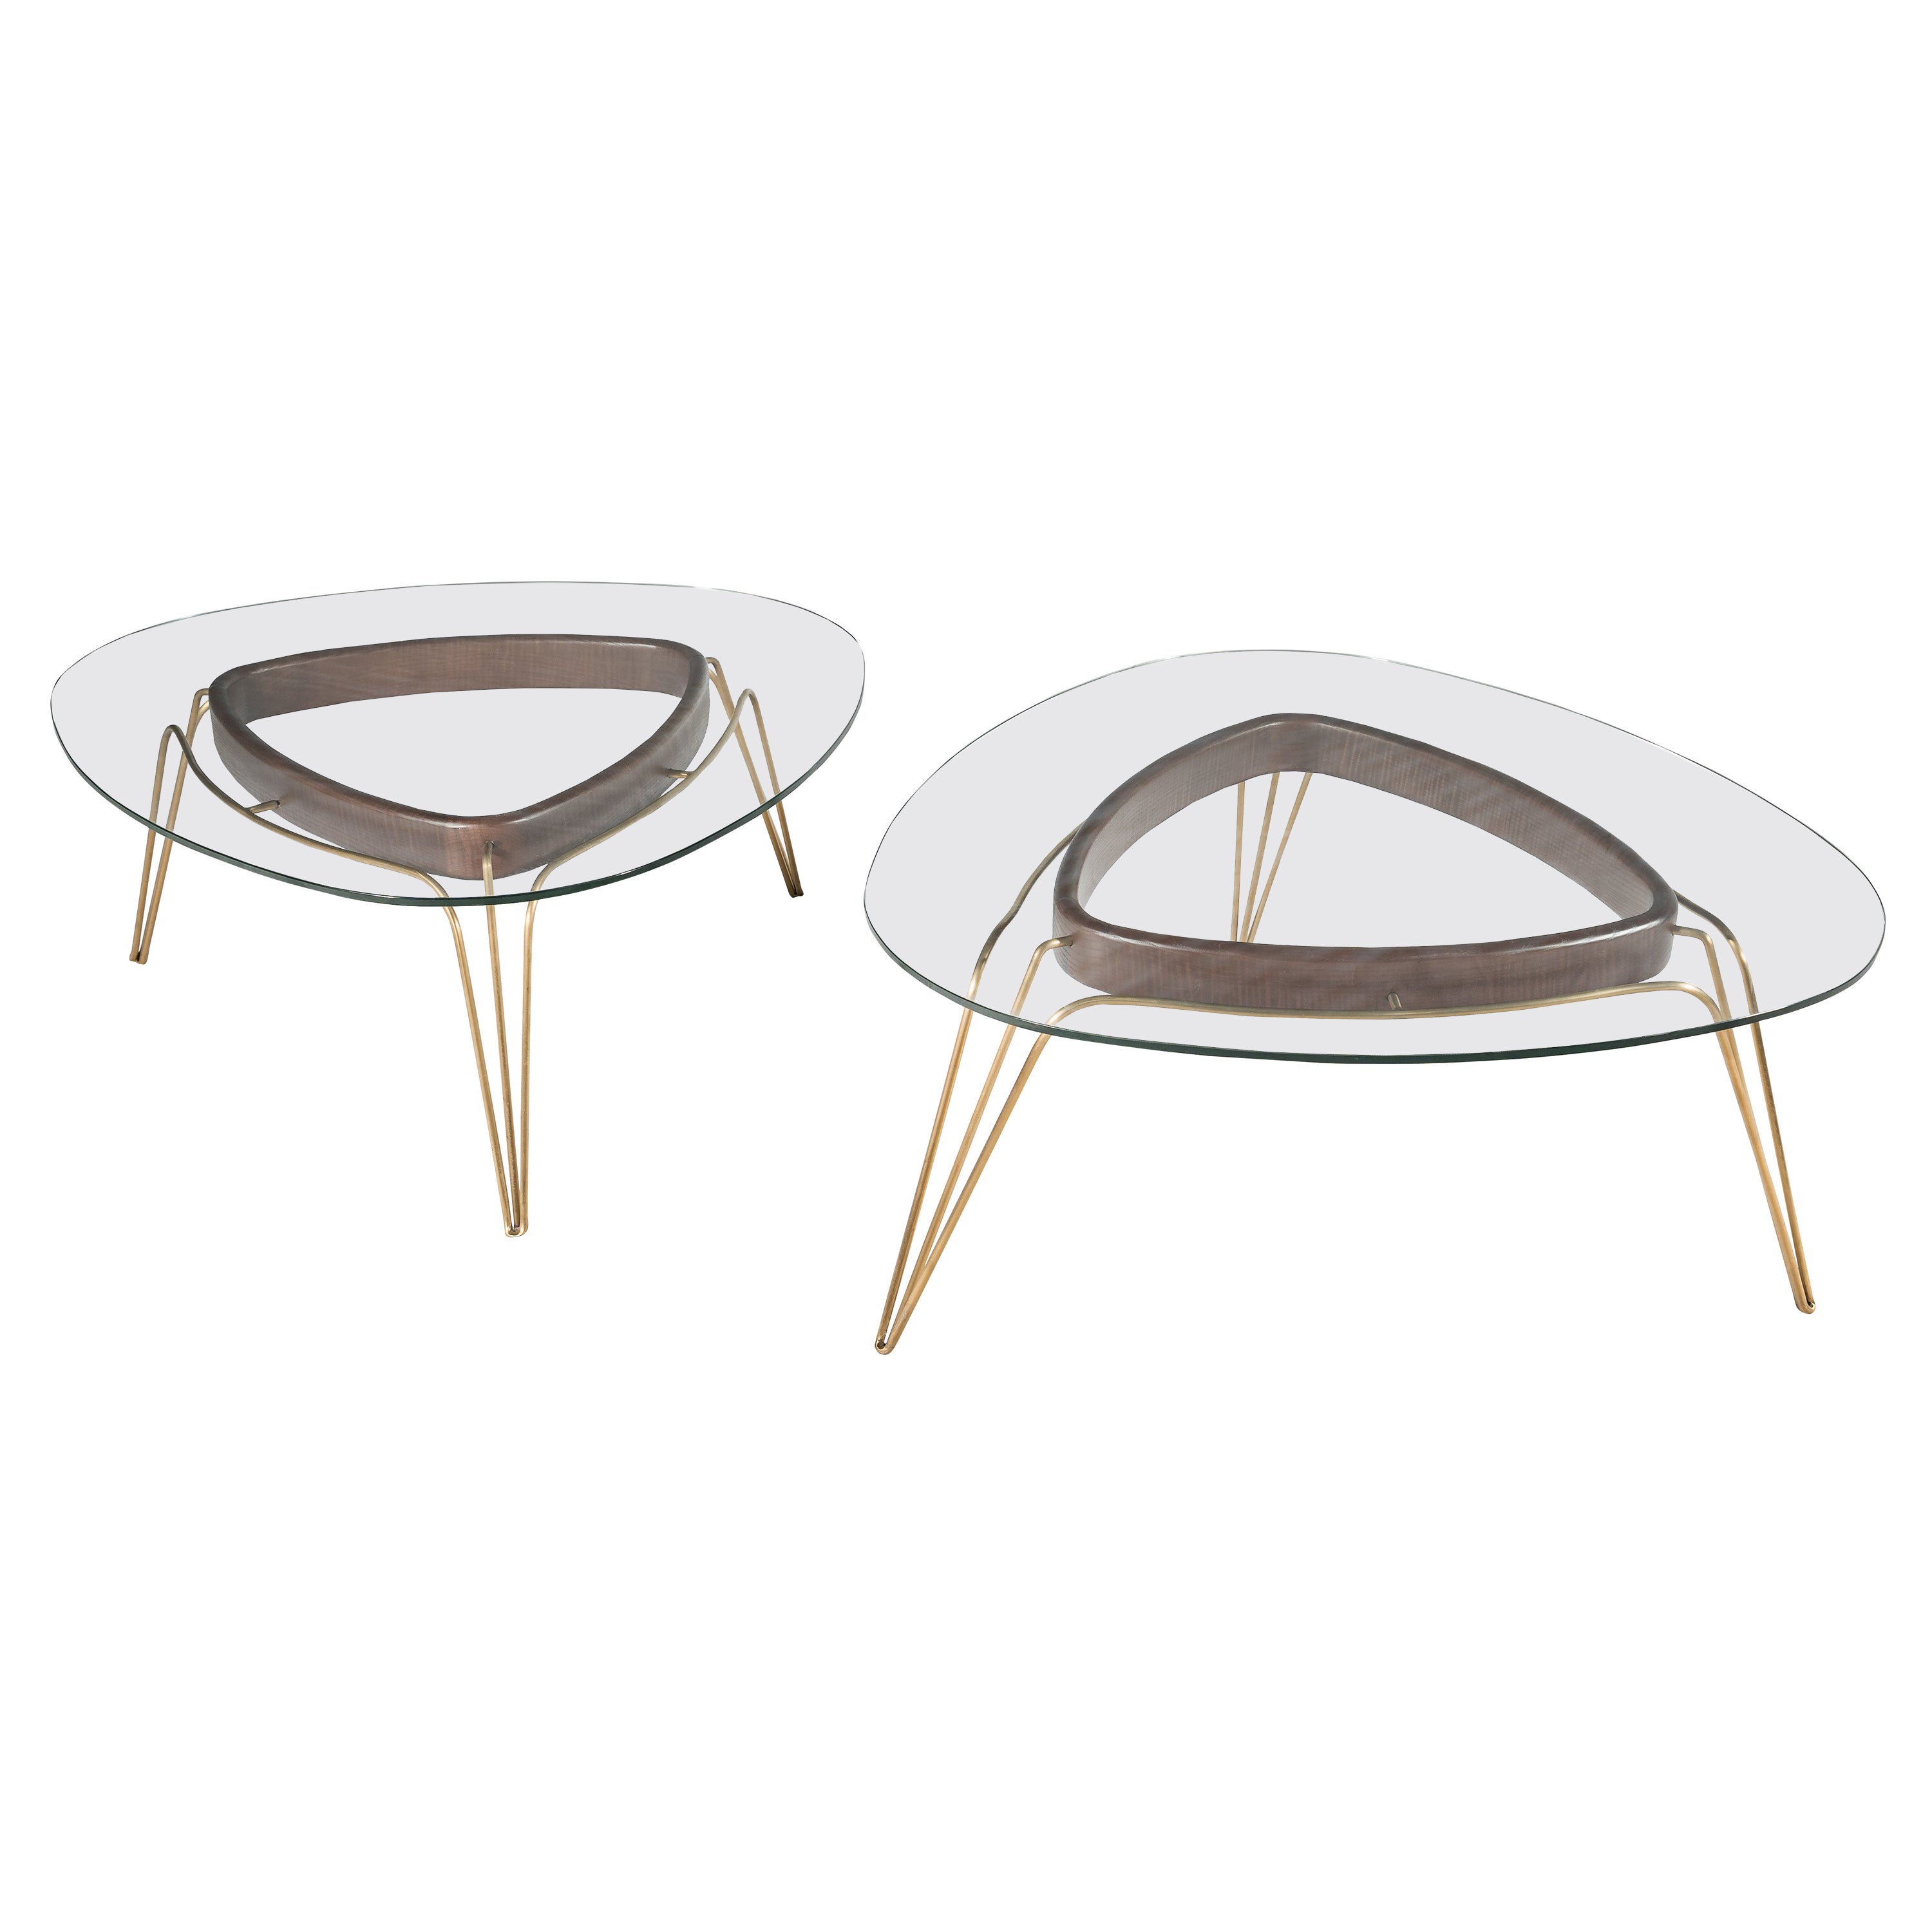 Banano Occasional Table M, Walnut Frame, Glass Top, Designed by Nigel Coates